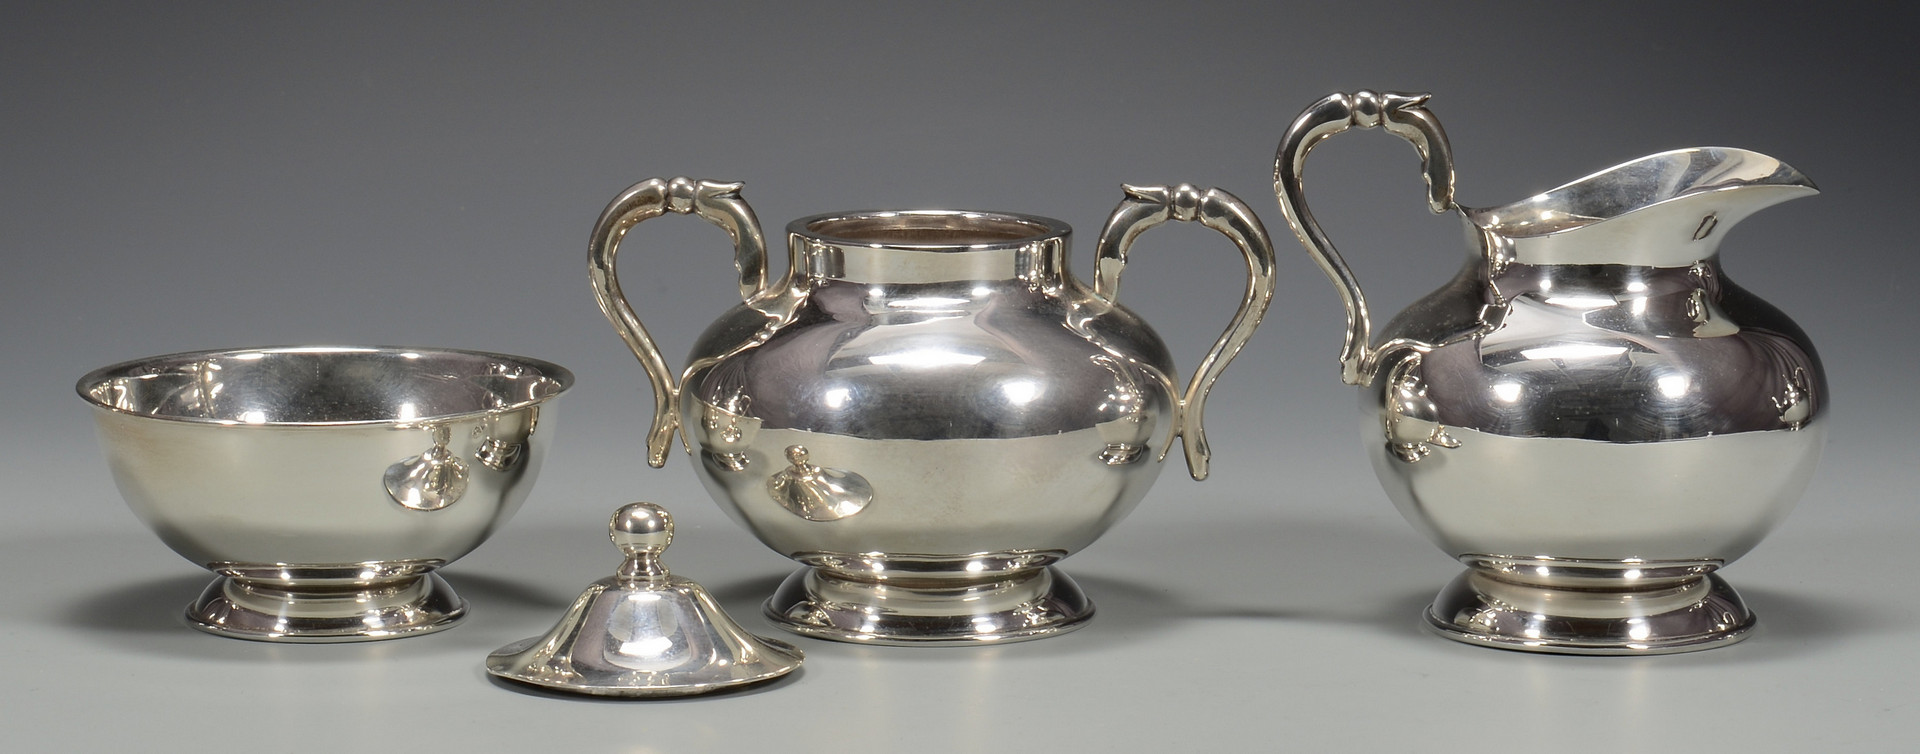 Lot 254: Mexican Sterling Tea Set & Tray